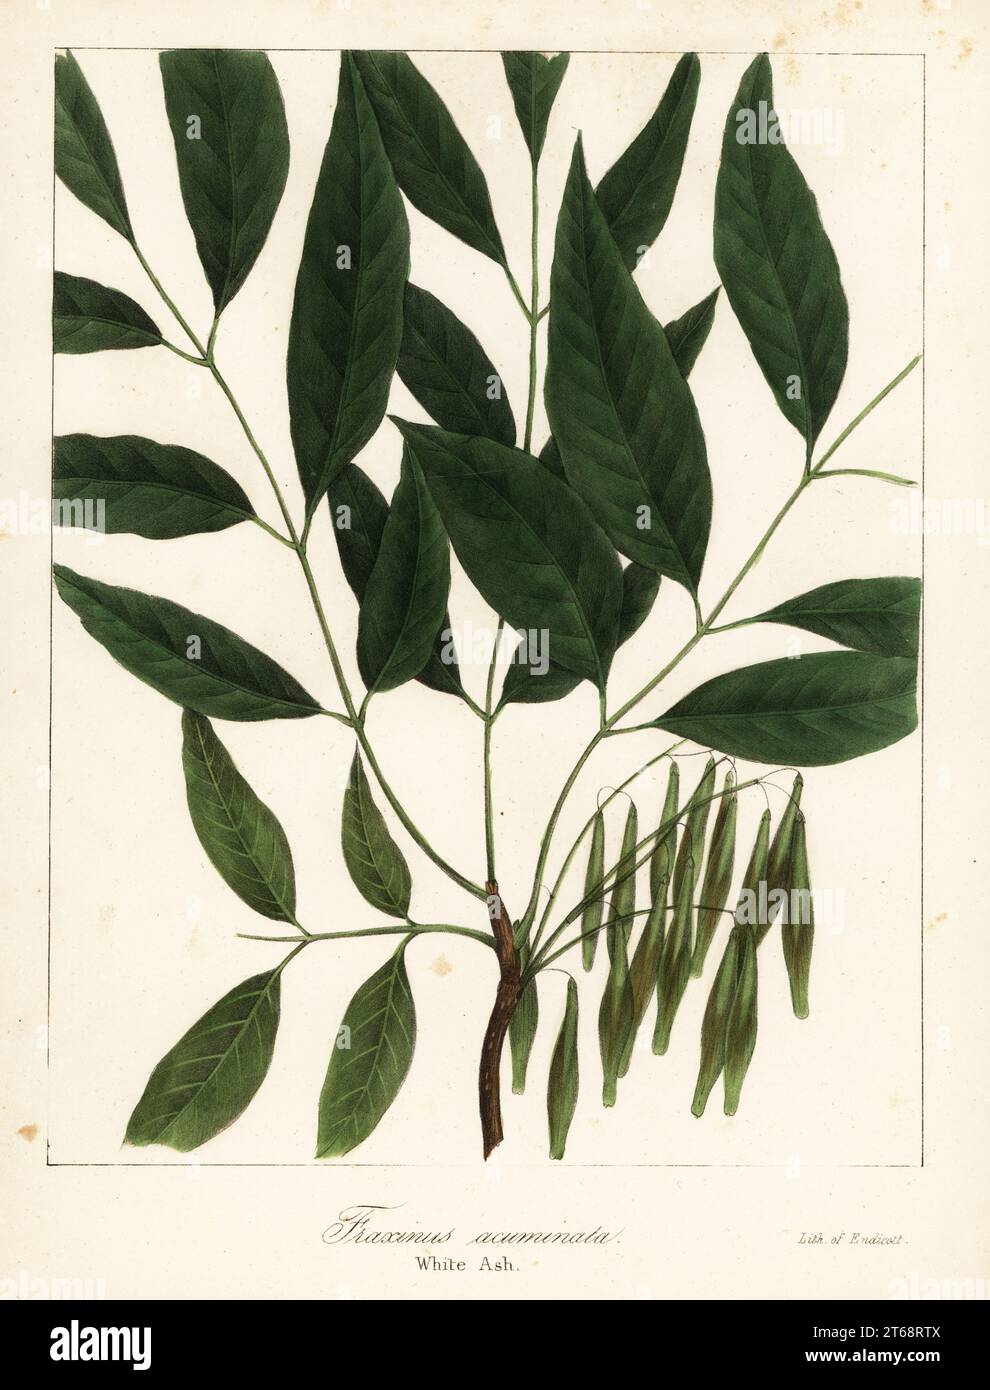 American ash, Fraxinus americana (White ash, Fraxinus acuminata). Critically endangered. Handcoloured lithograph by Endicott after a botanical illustration from John Torreys A Flora of the State of New York, Carroll and Cook, Albany, 1843. The plates drawn by John Torrey, Agnes Mitchell, Elizabeth Paoley and Swinton. John Torrey was an American botanist, chemist and physician 1796-1873. Stock Photo